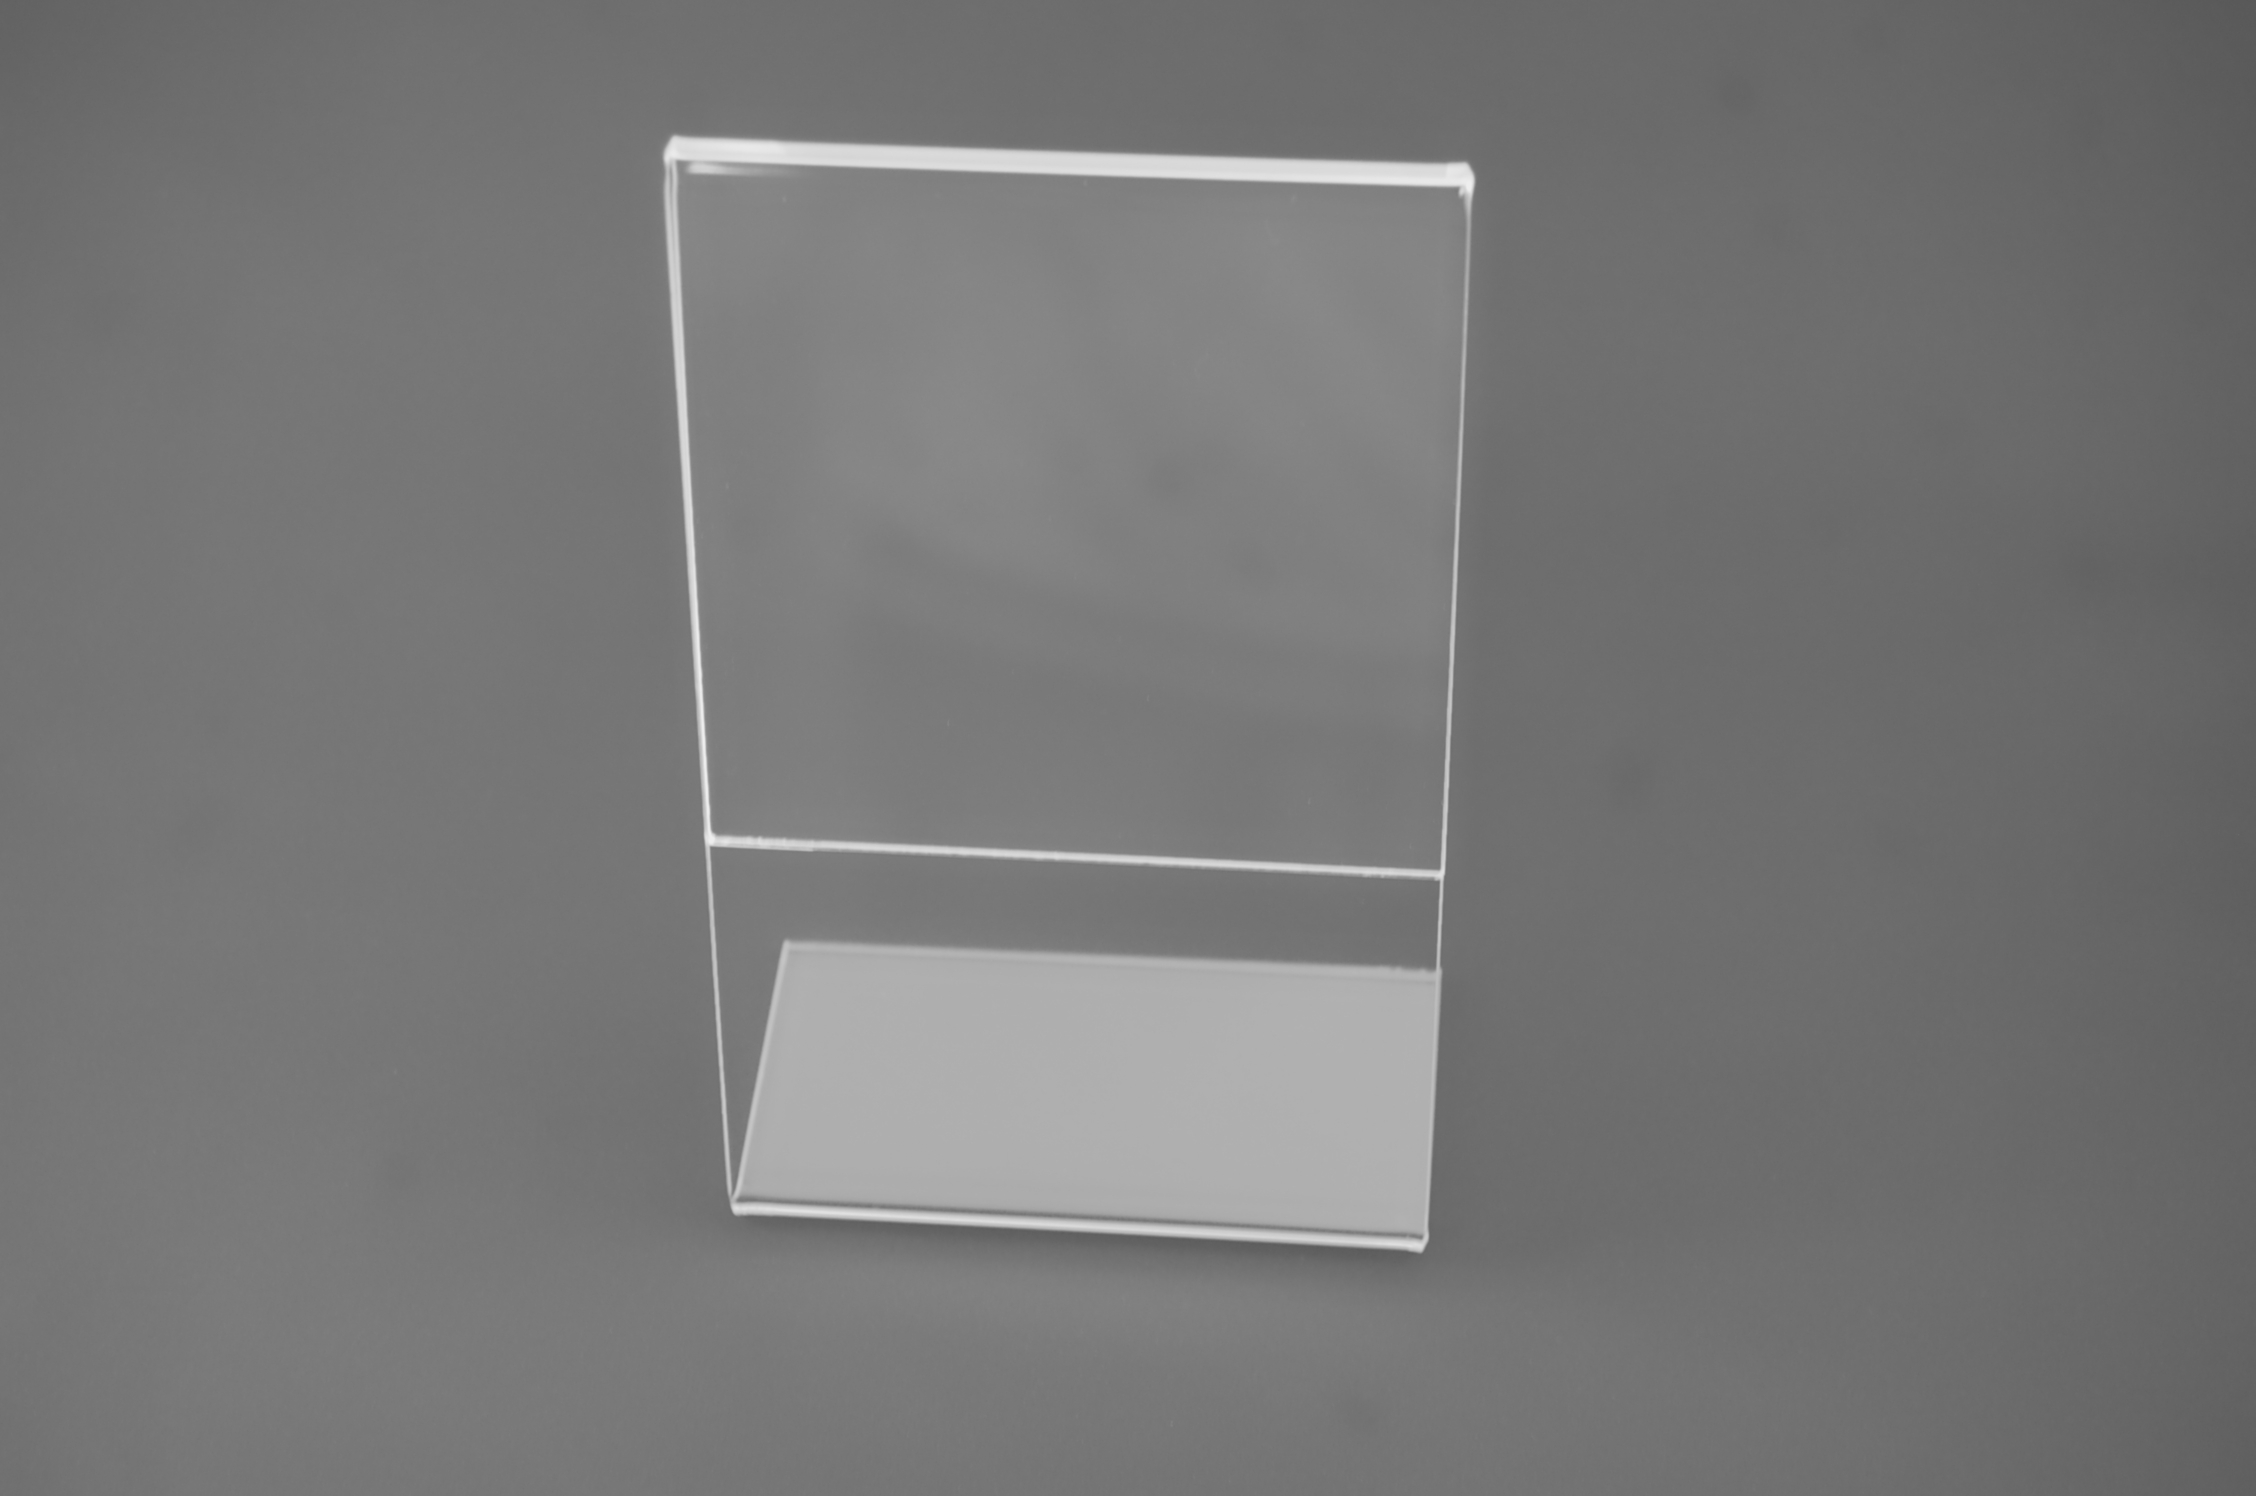 Acrylic Slant Back Sign Holder - Ores Display Systems